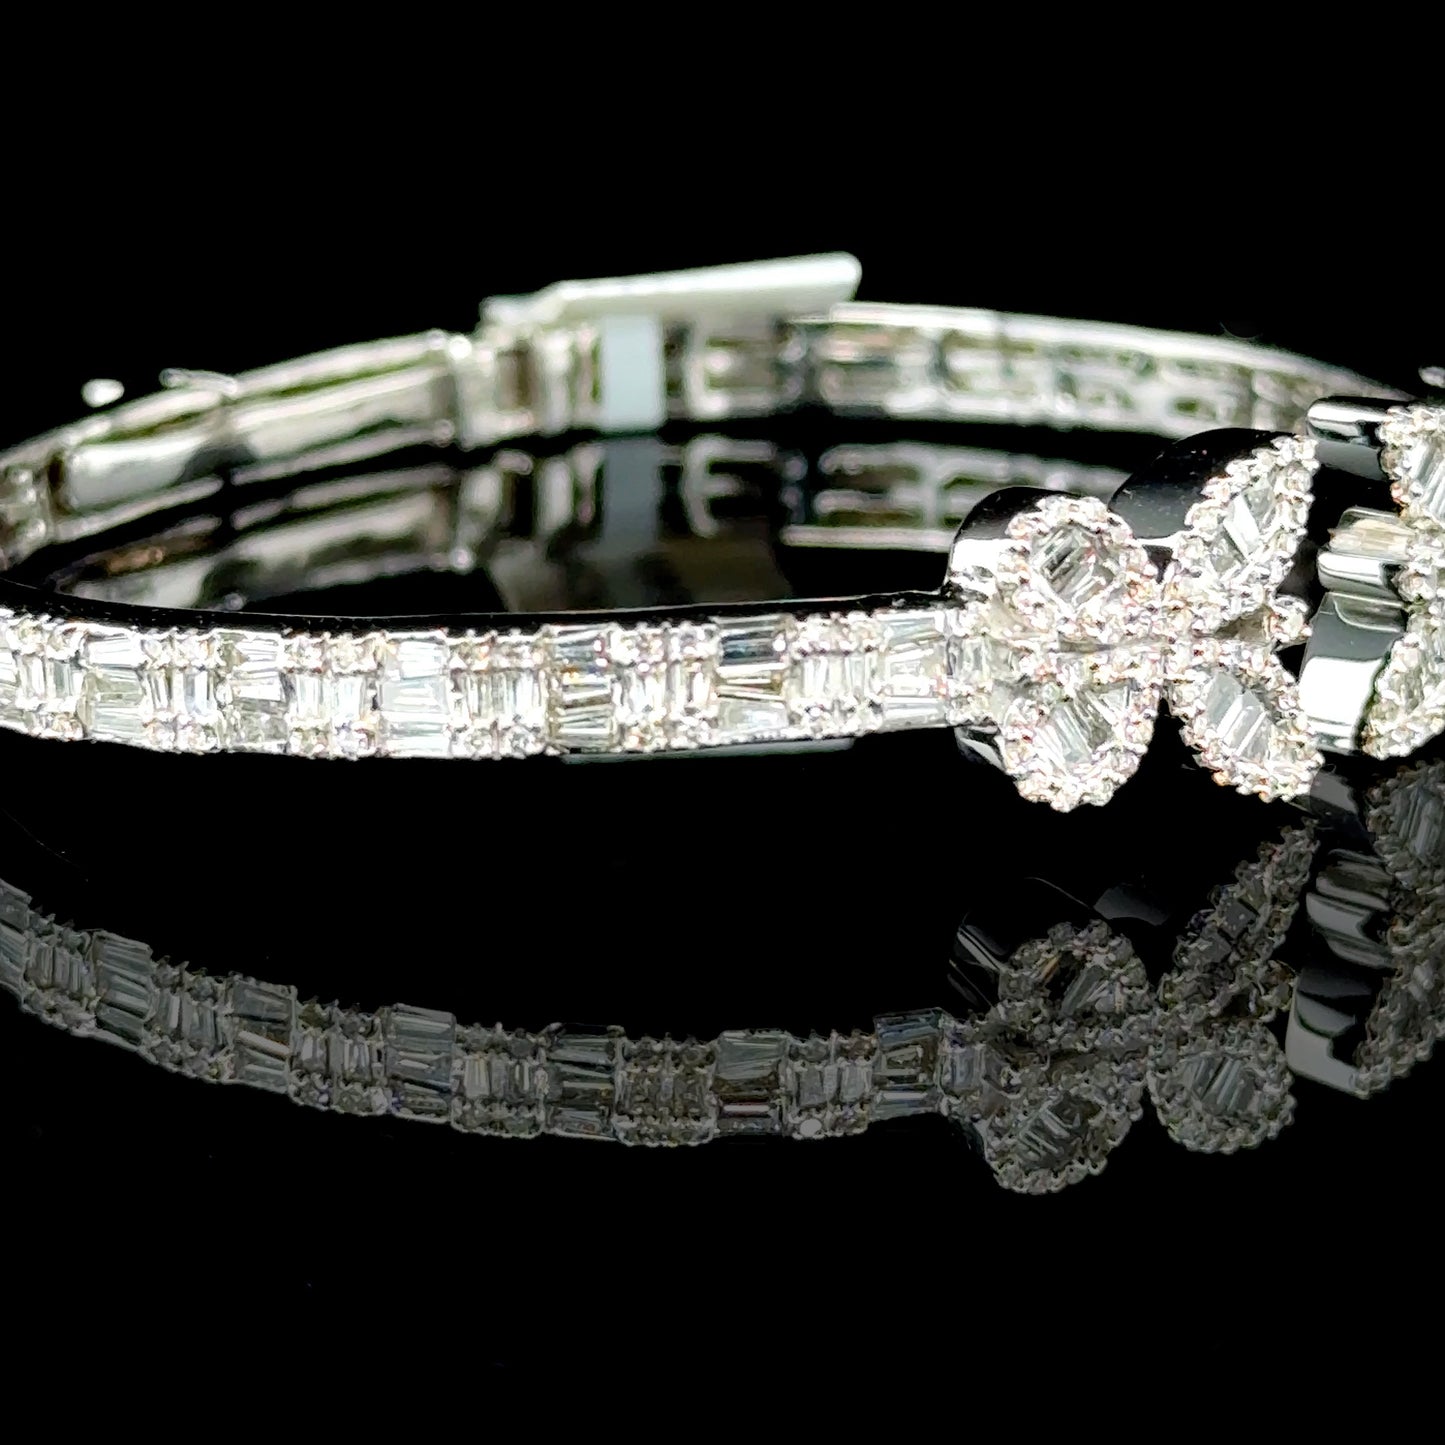 10K white gold bangle with a butterfly design and diamonds